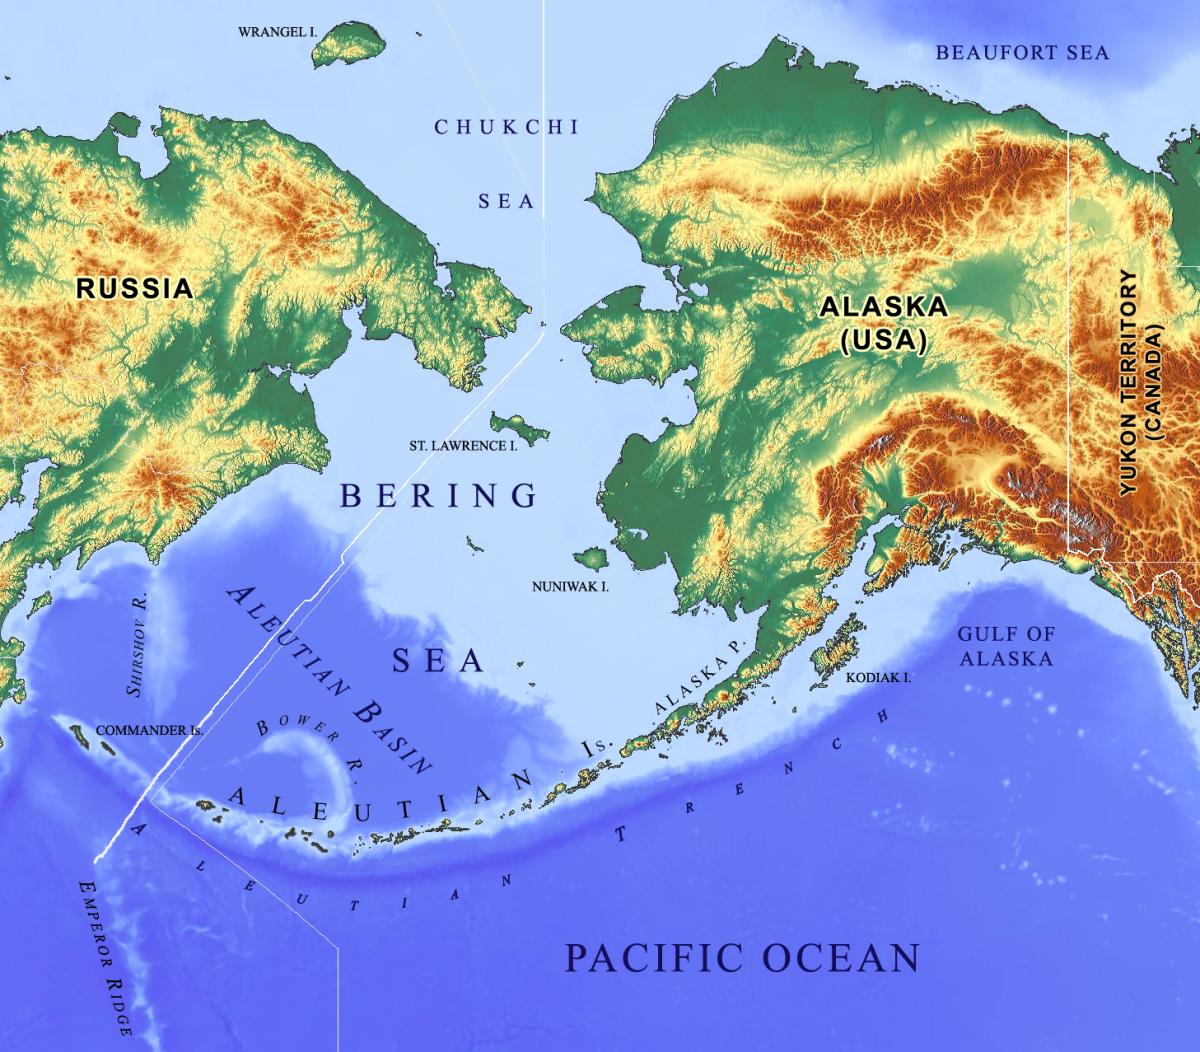 Map of the Bering Strait (image courtesy of Gretarsson, CC BY-SA 2.0)